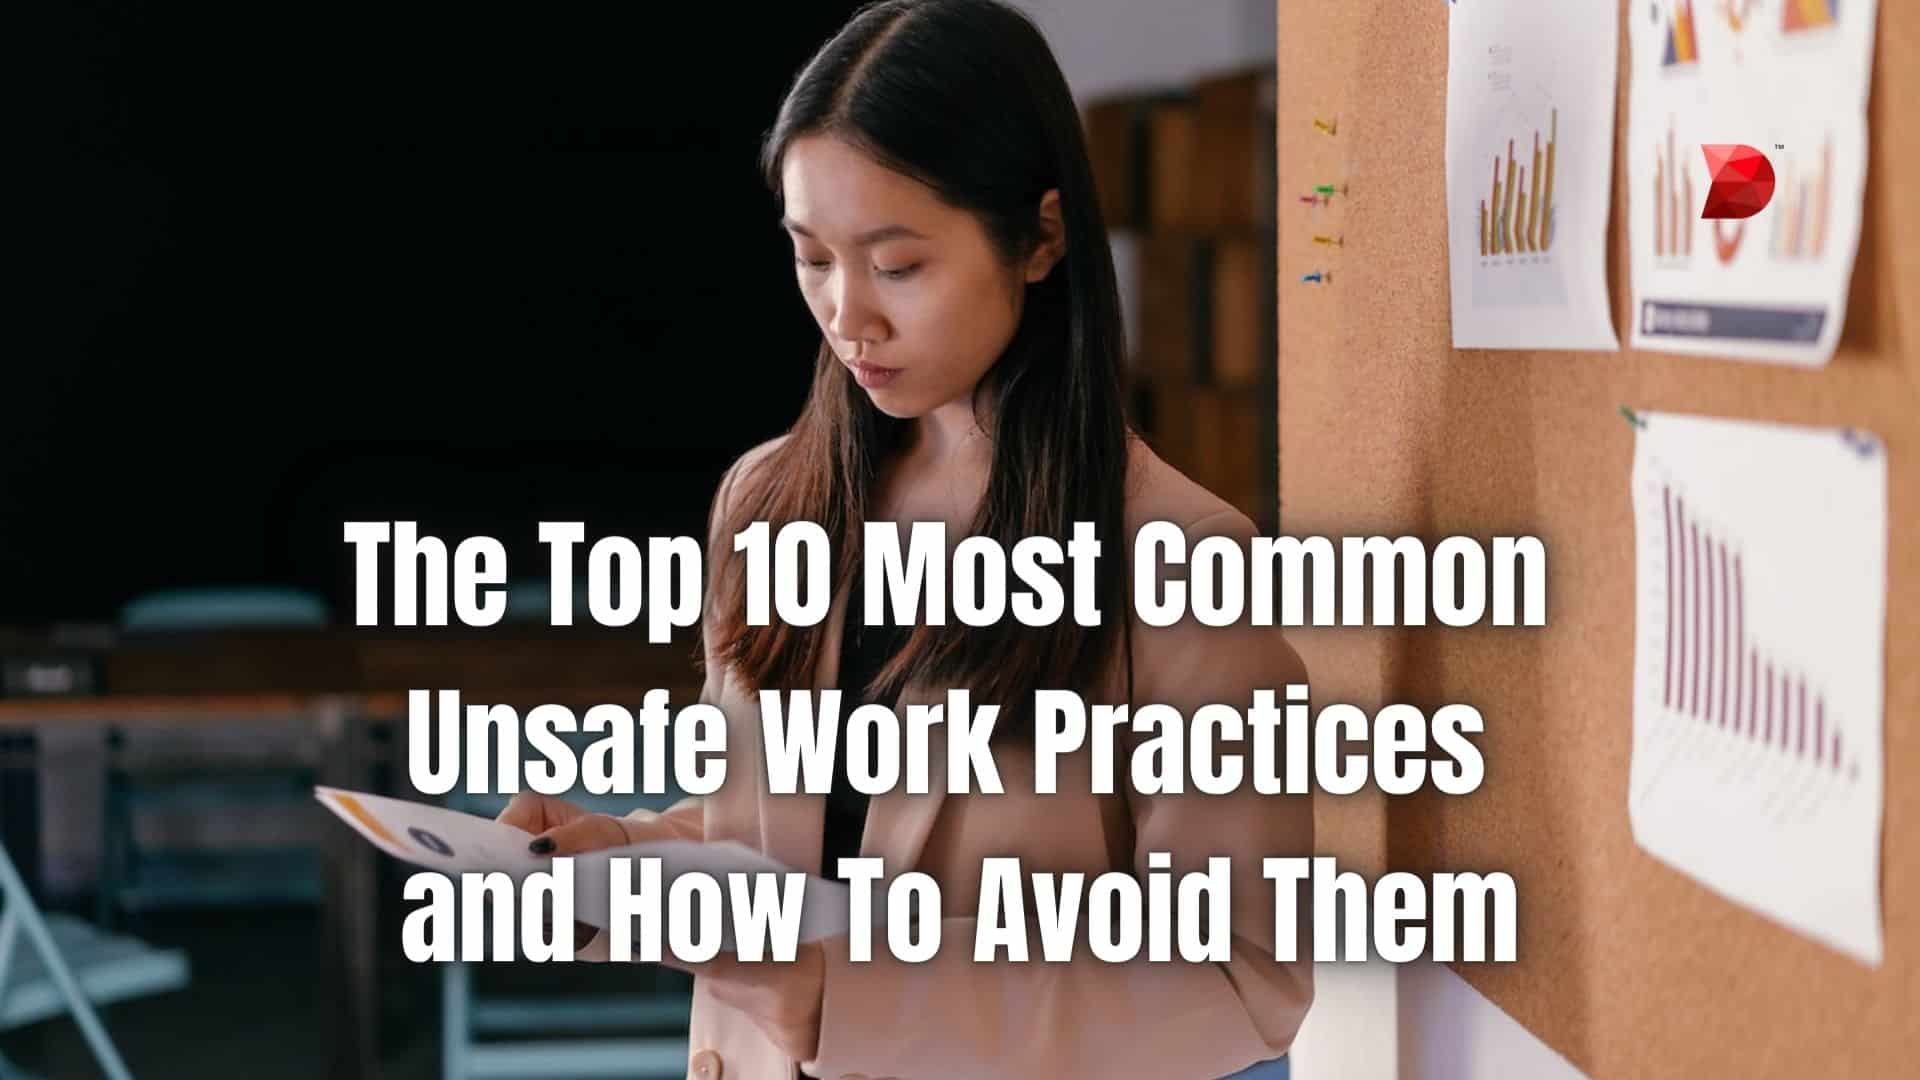 The Top 10 Most Common Unsafe Work Practices and How To Avoid Them